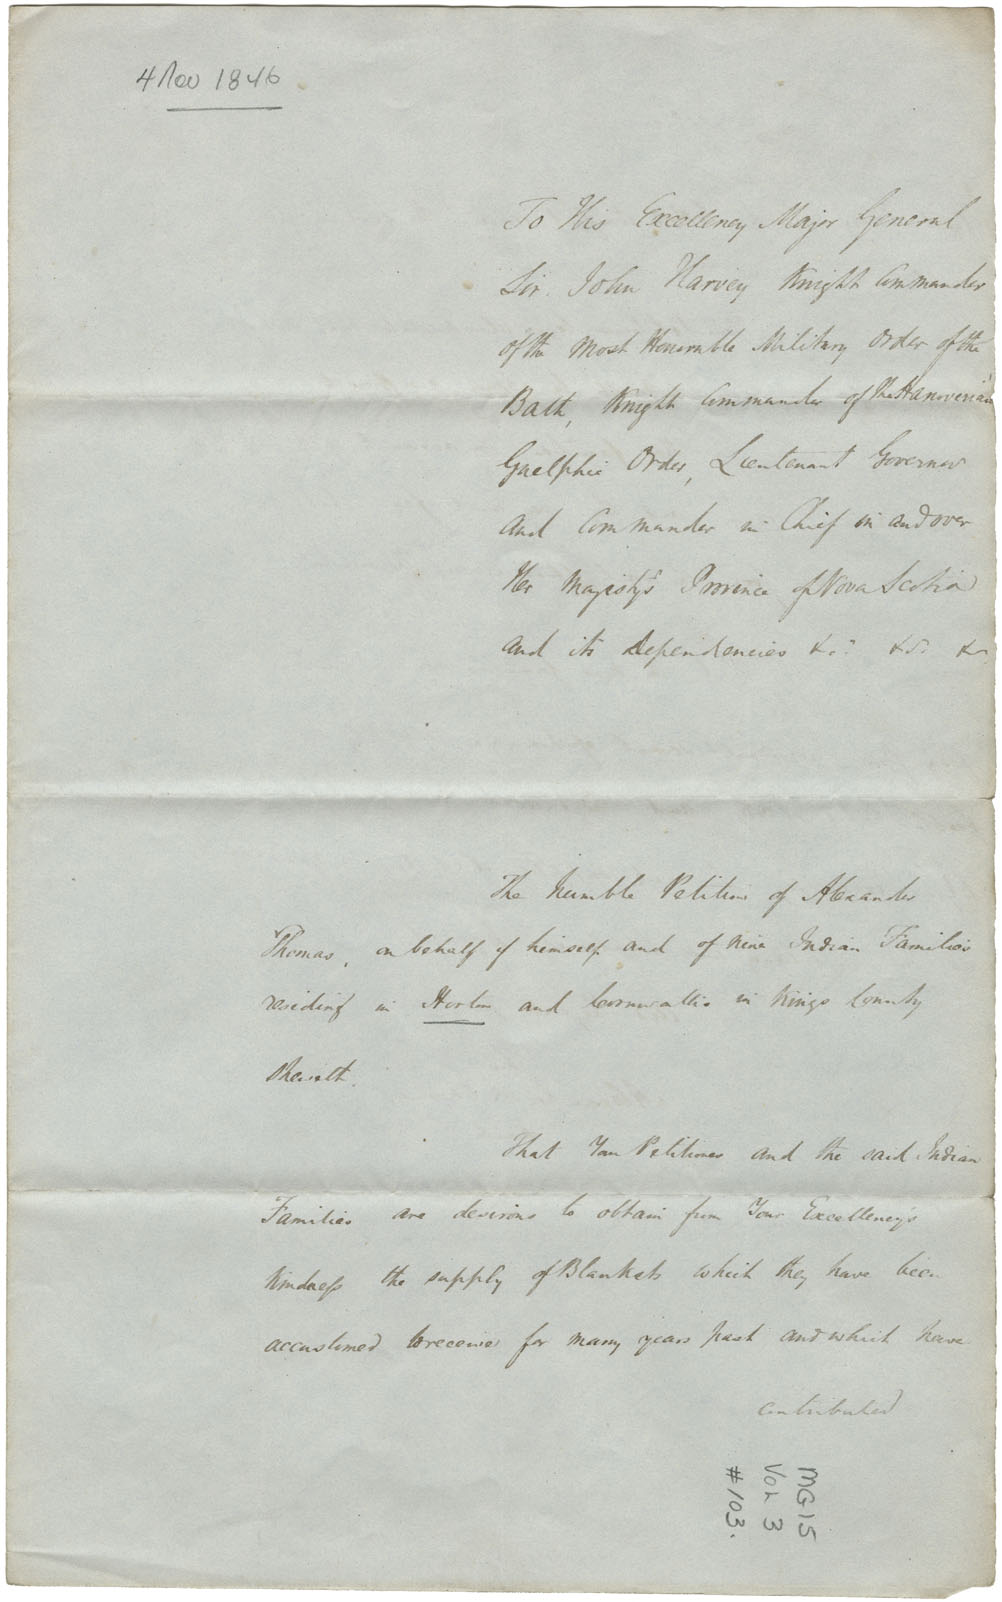 Petition of Alexander Thomas on behalf of himself and Mi'kmaq residing at Horton and Cornwallis, for blankets and food, with supporting statement from Charles Harris of Horton and Thomas A.S. De Wolf. 